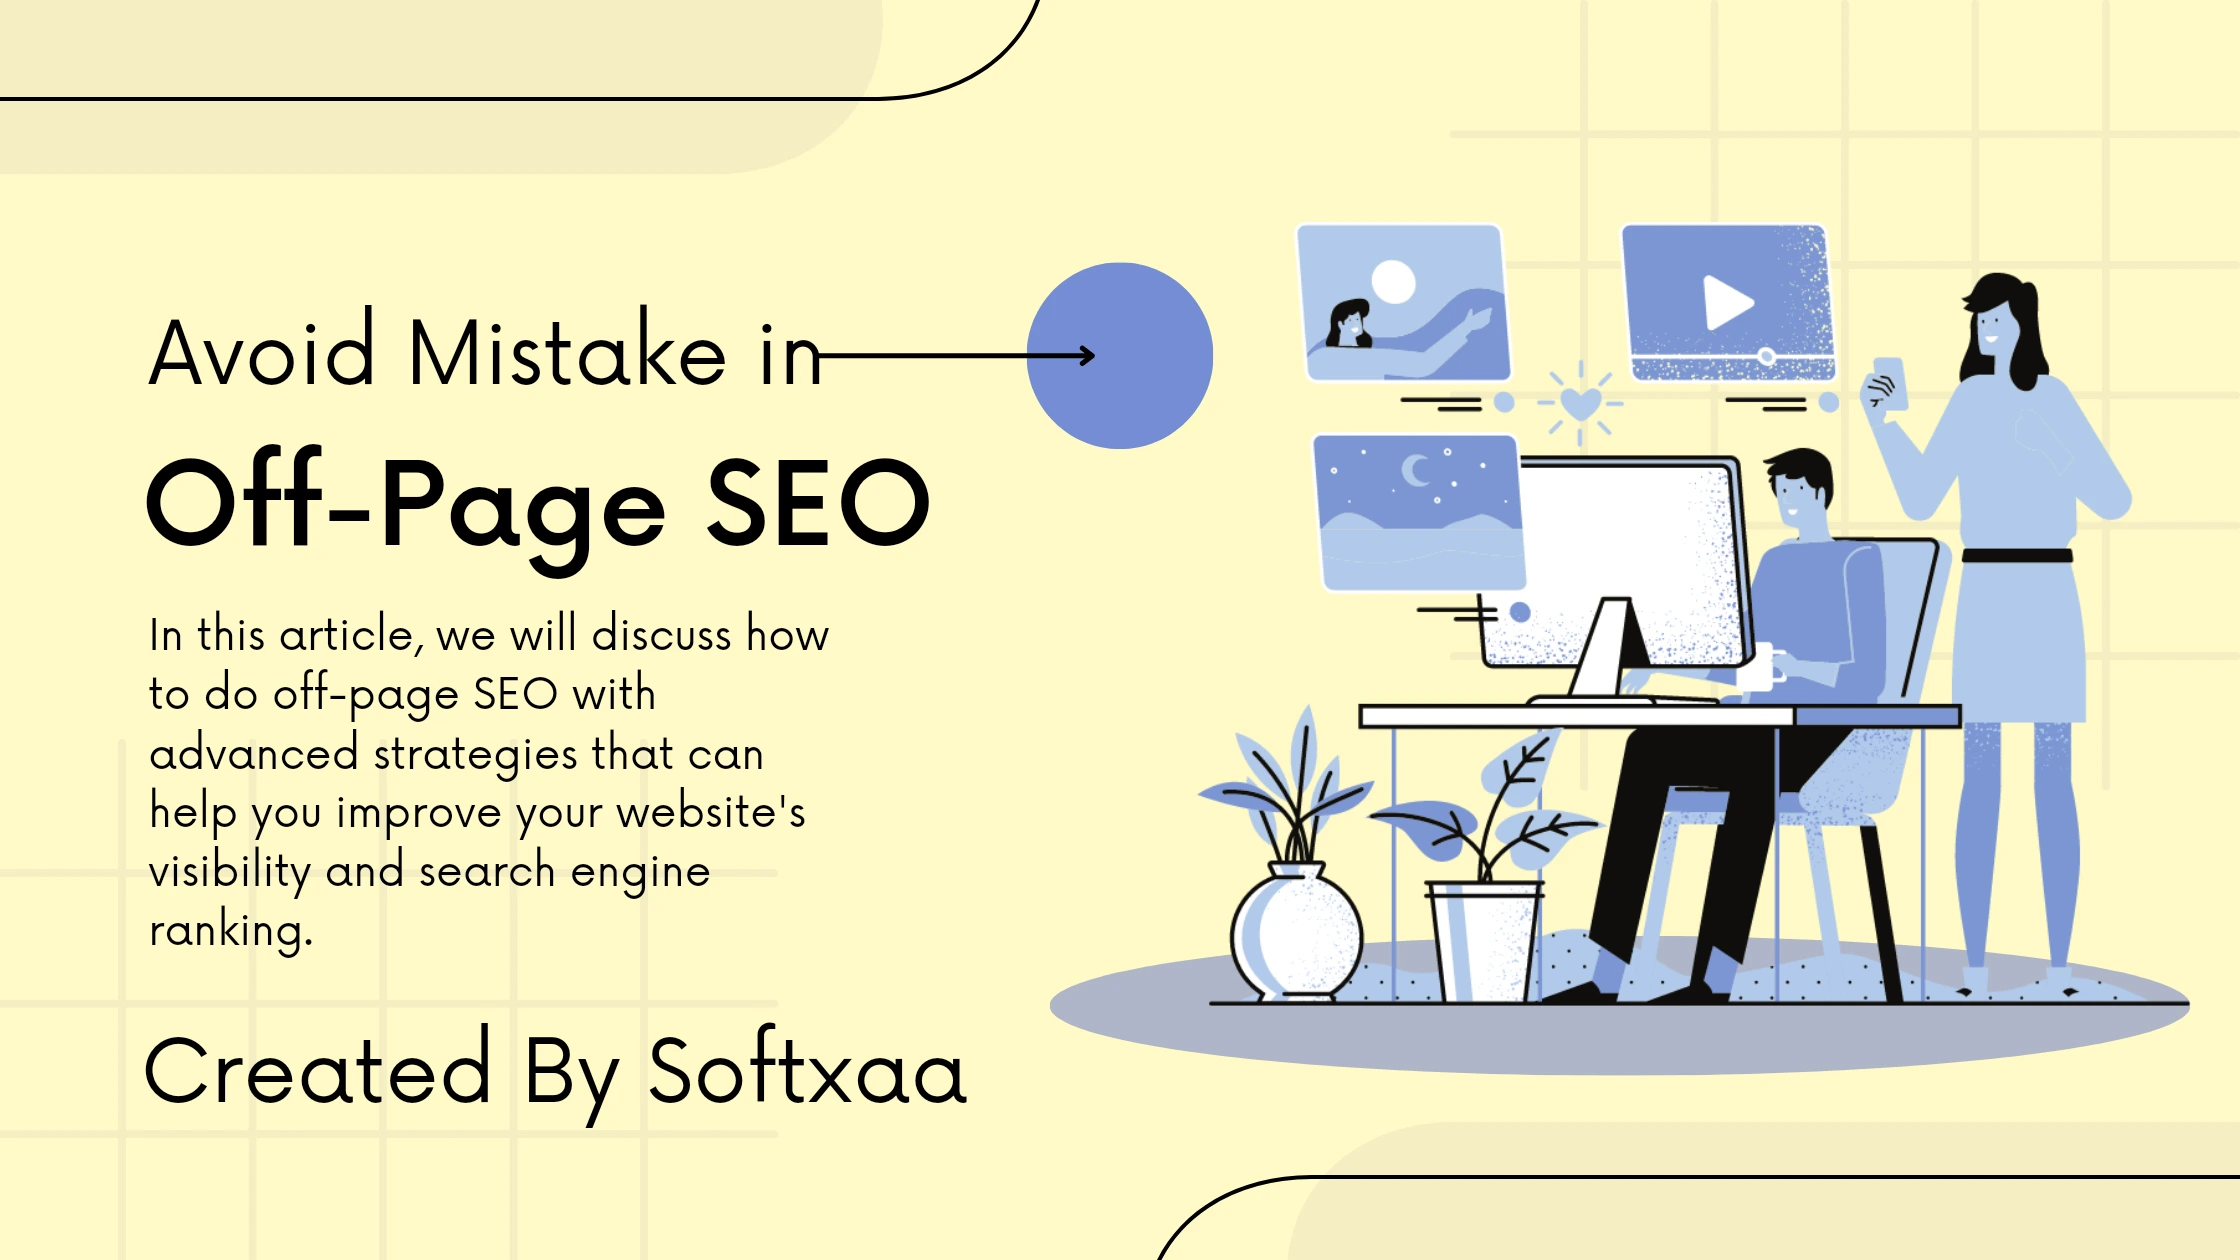 Common Mistakes to Avoid in Off-Page SEO